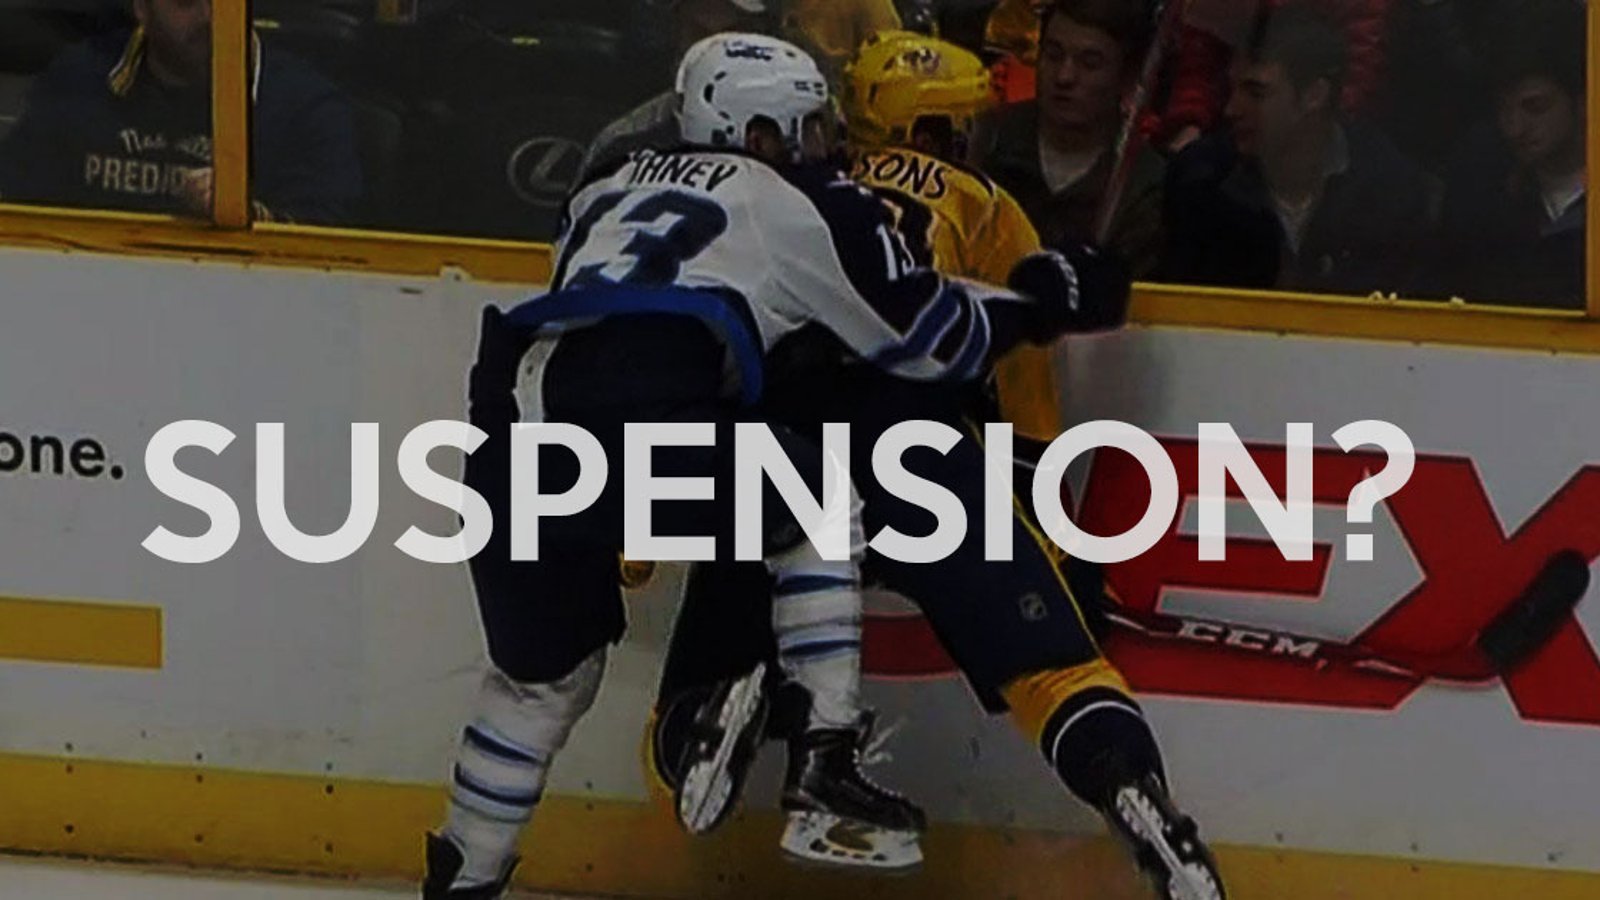 Tanev lays a nasty hit, suspension worthy?